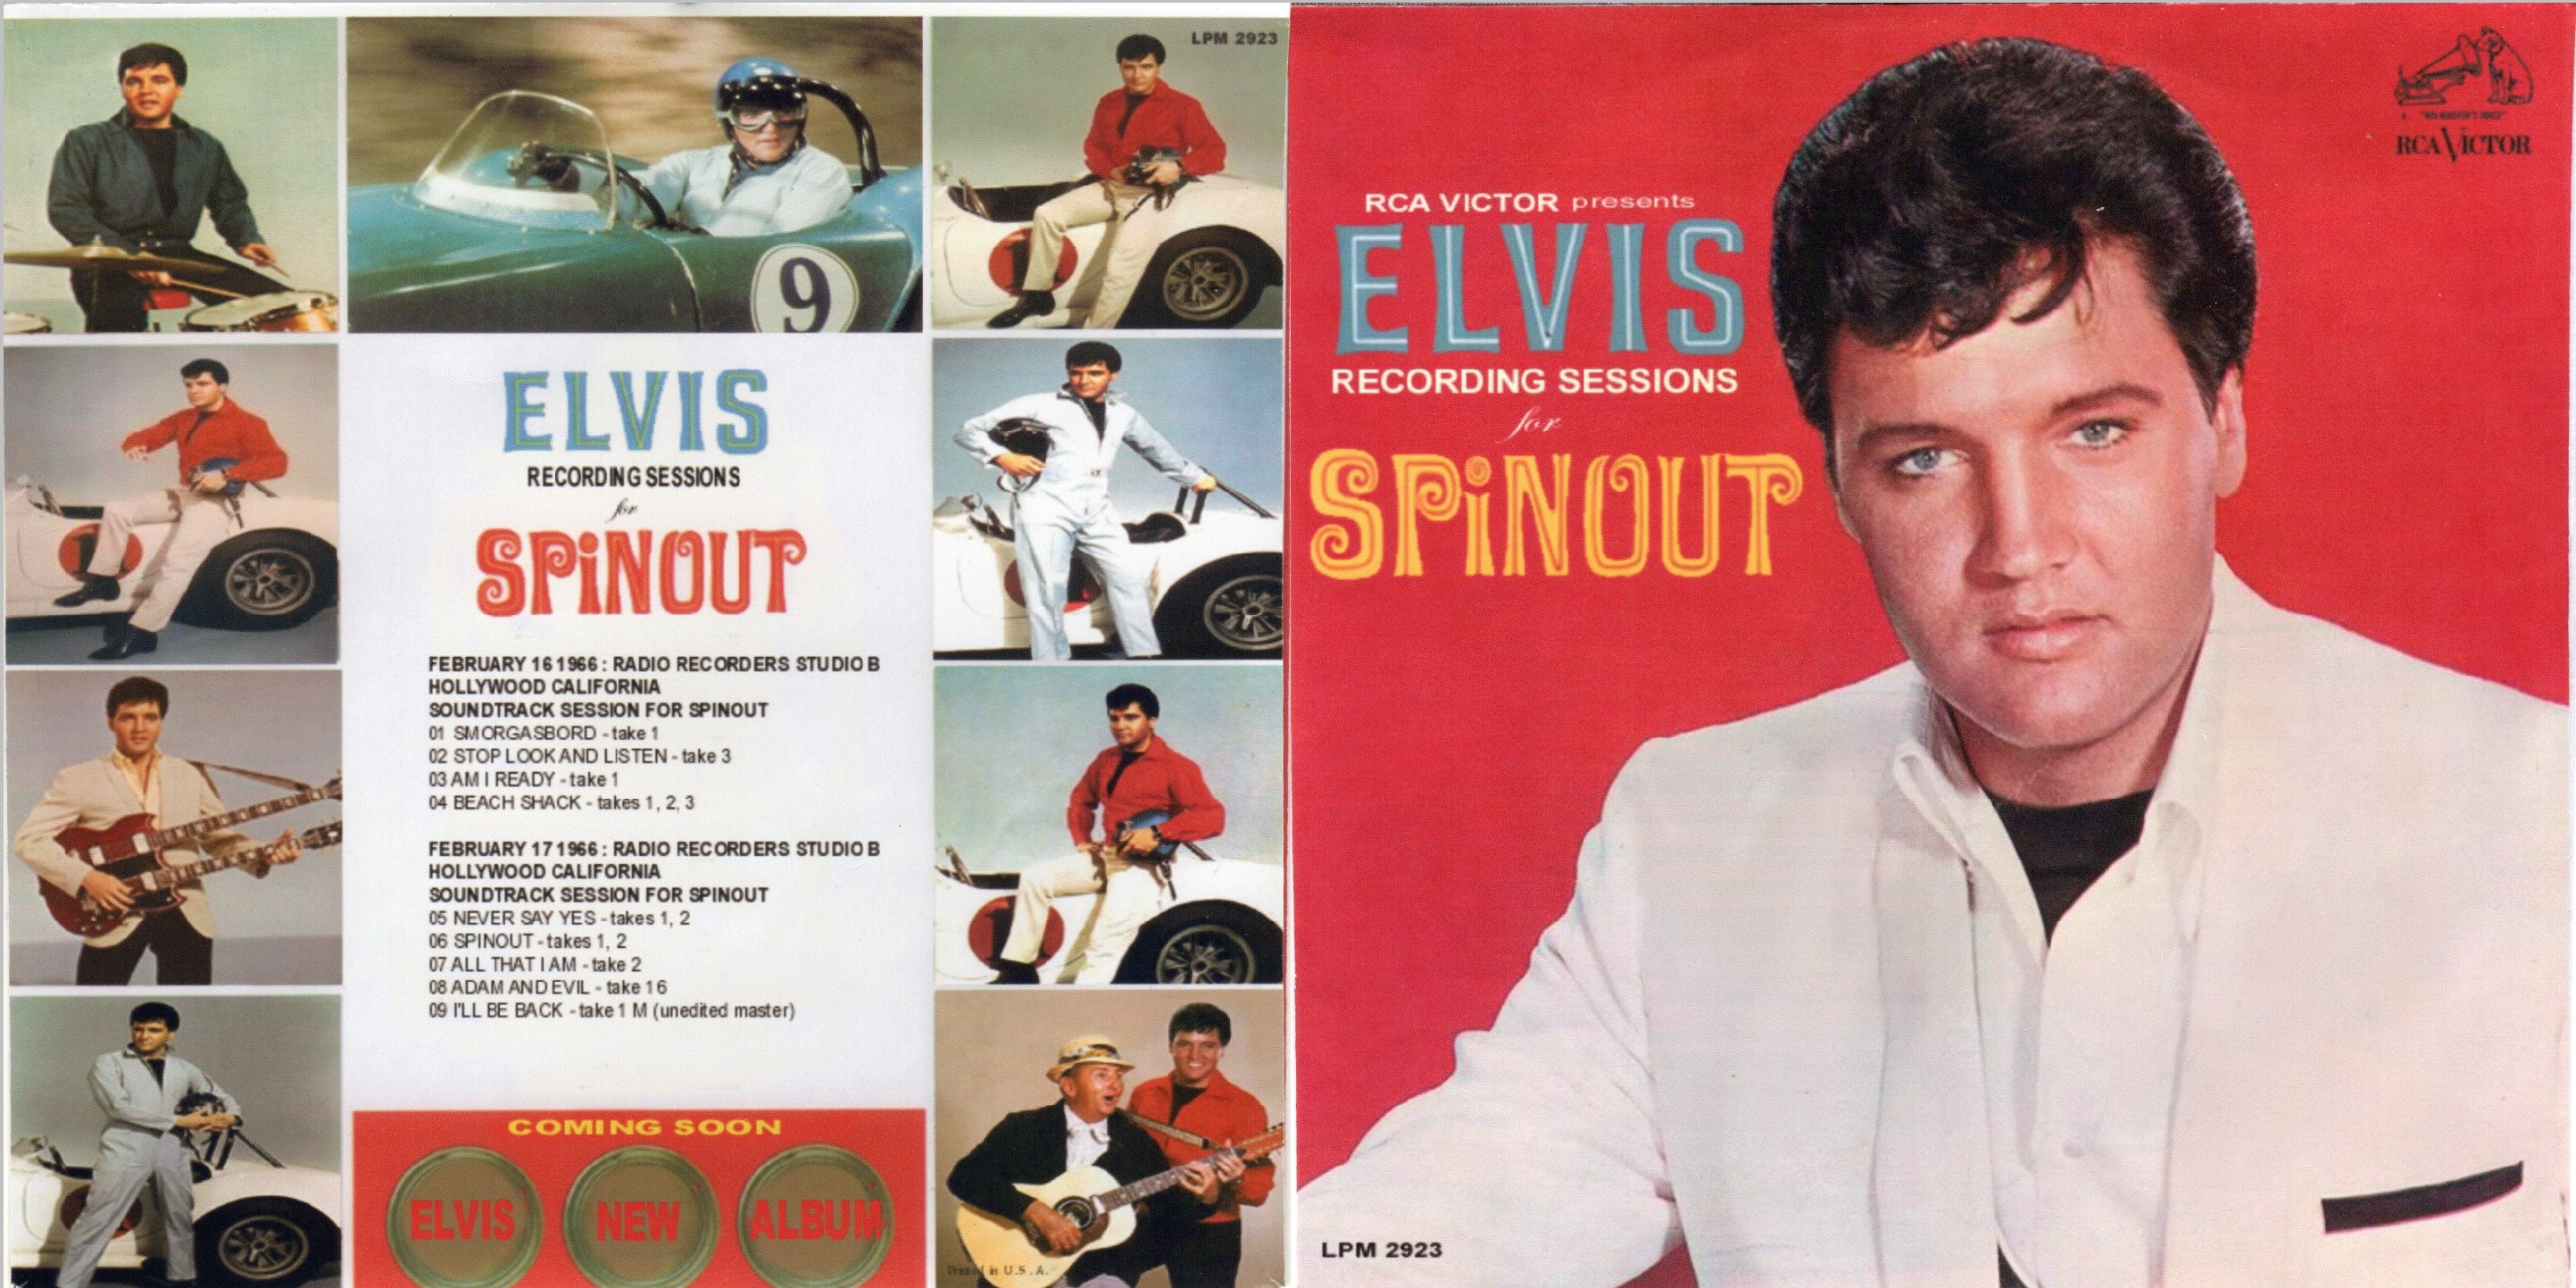 Elvis Presley - Recording Sessions For Spinout [CMT Star LPM2923]